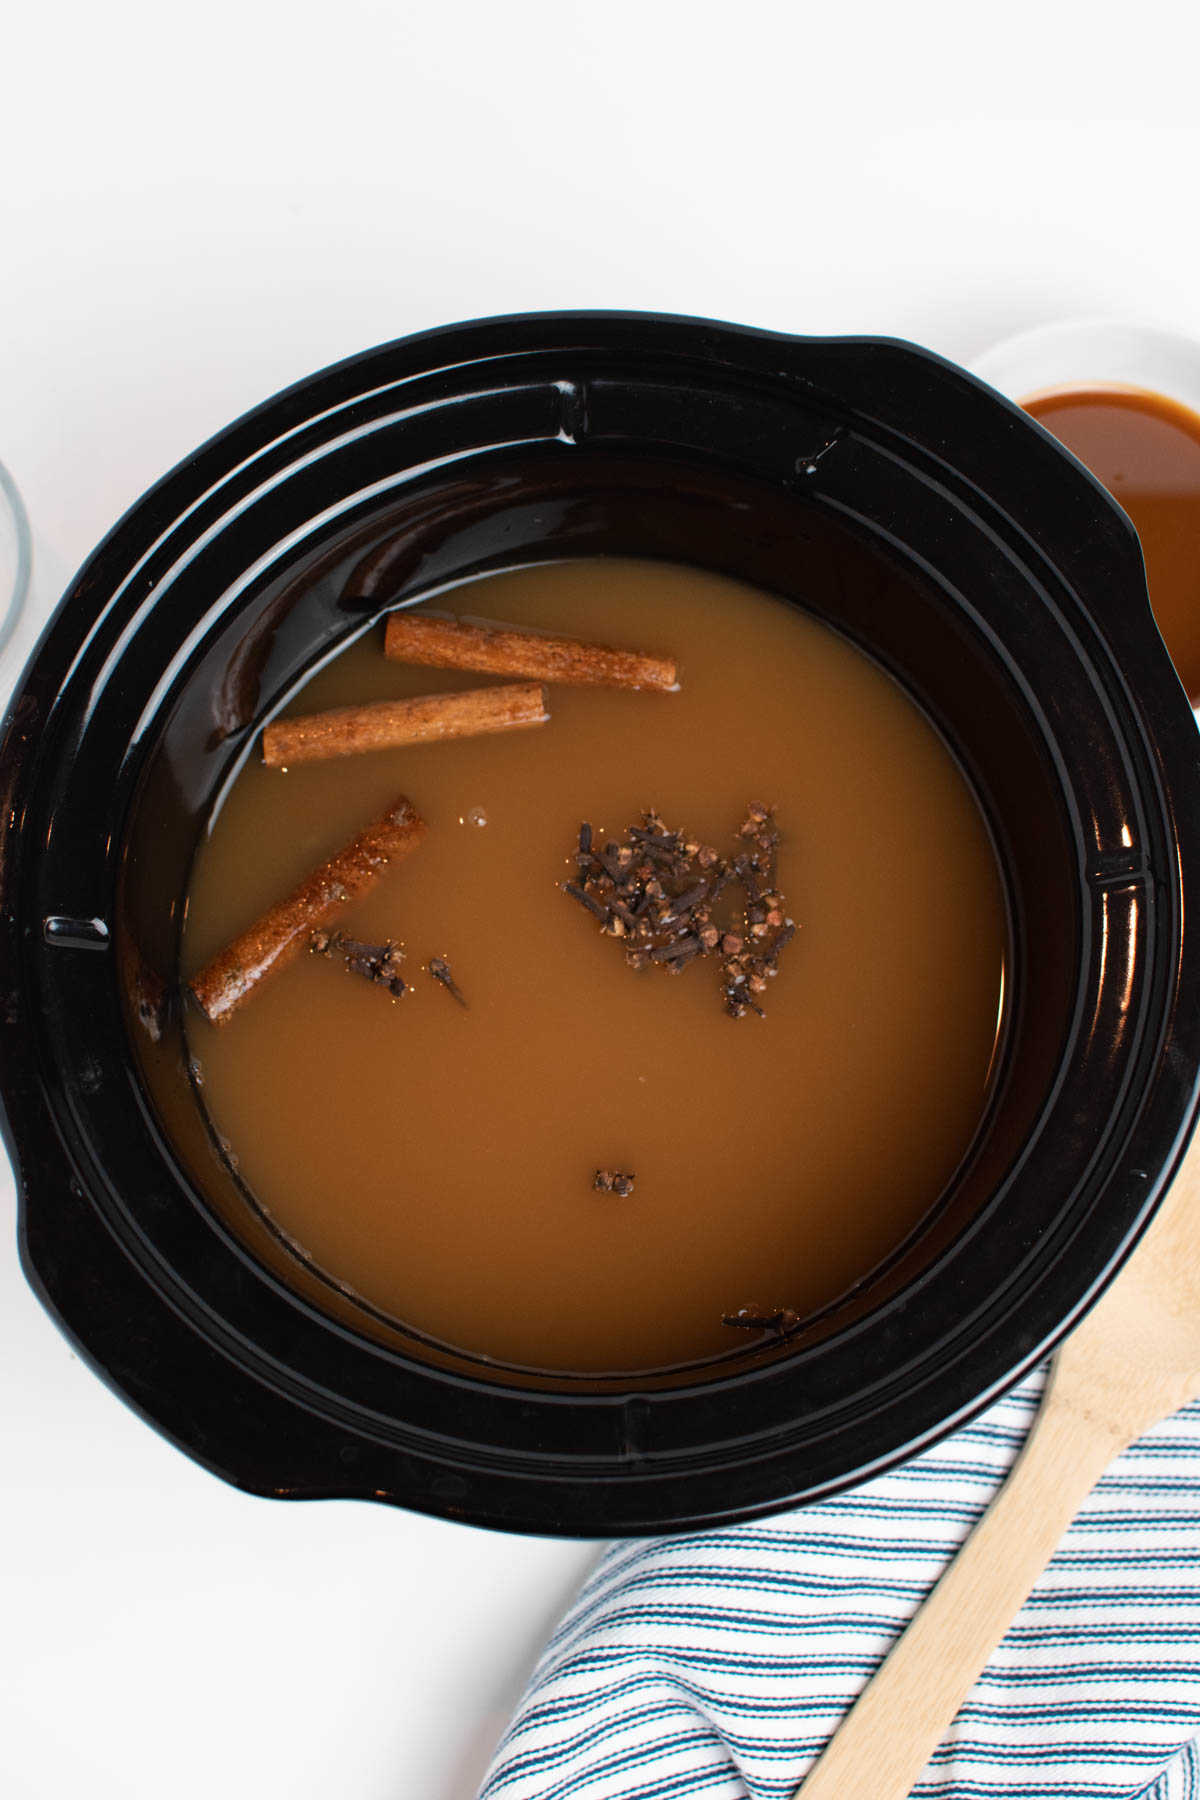 Whole sticks of cinnamon, cloves, and apple cider in black slow cooker insert.